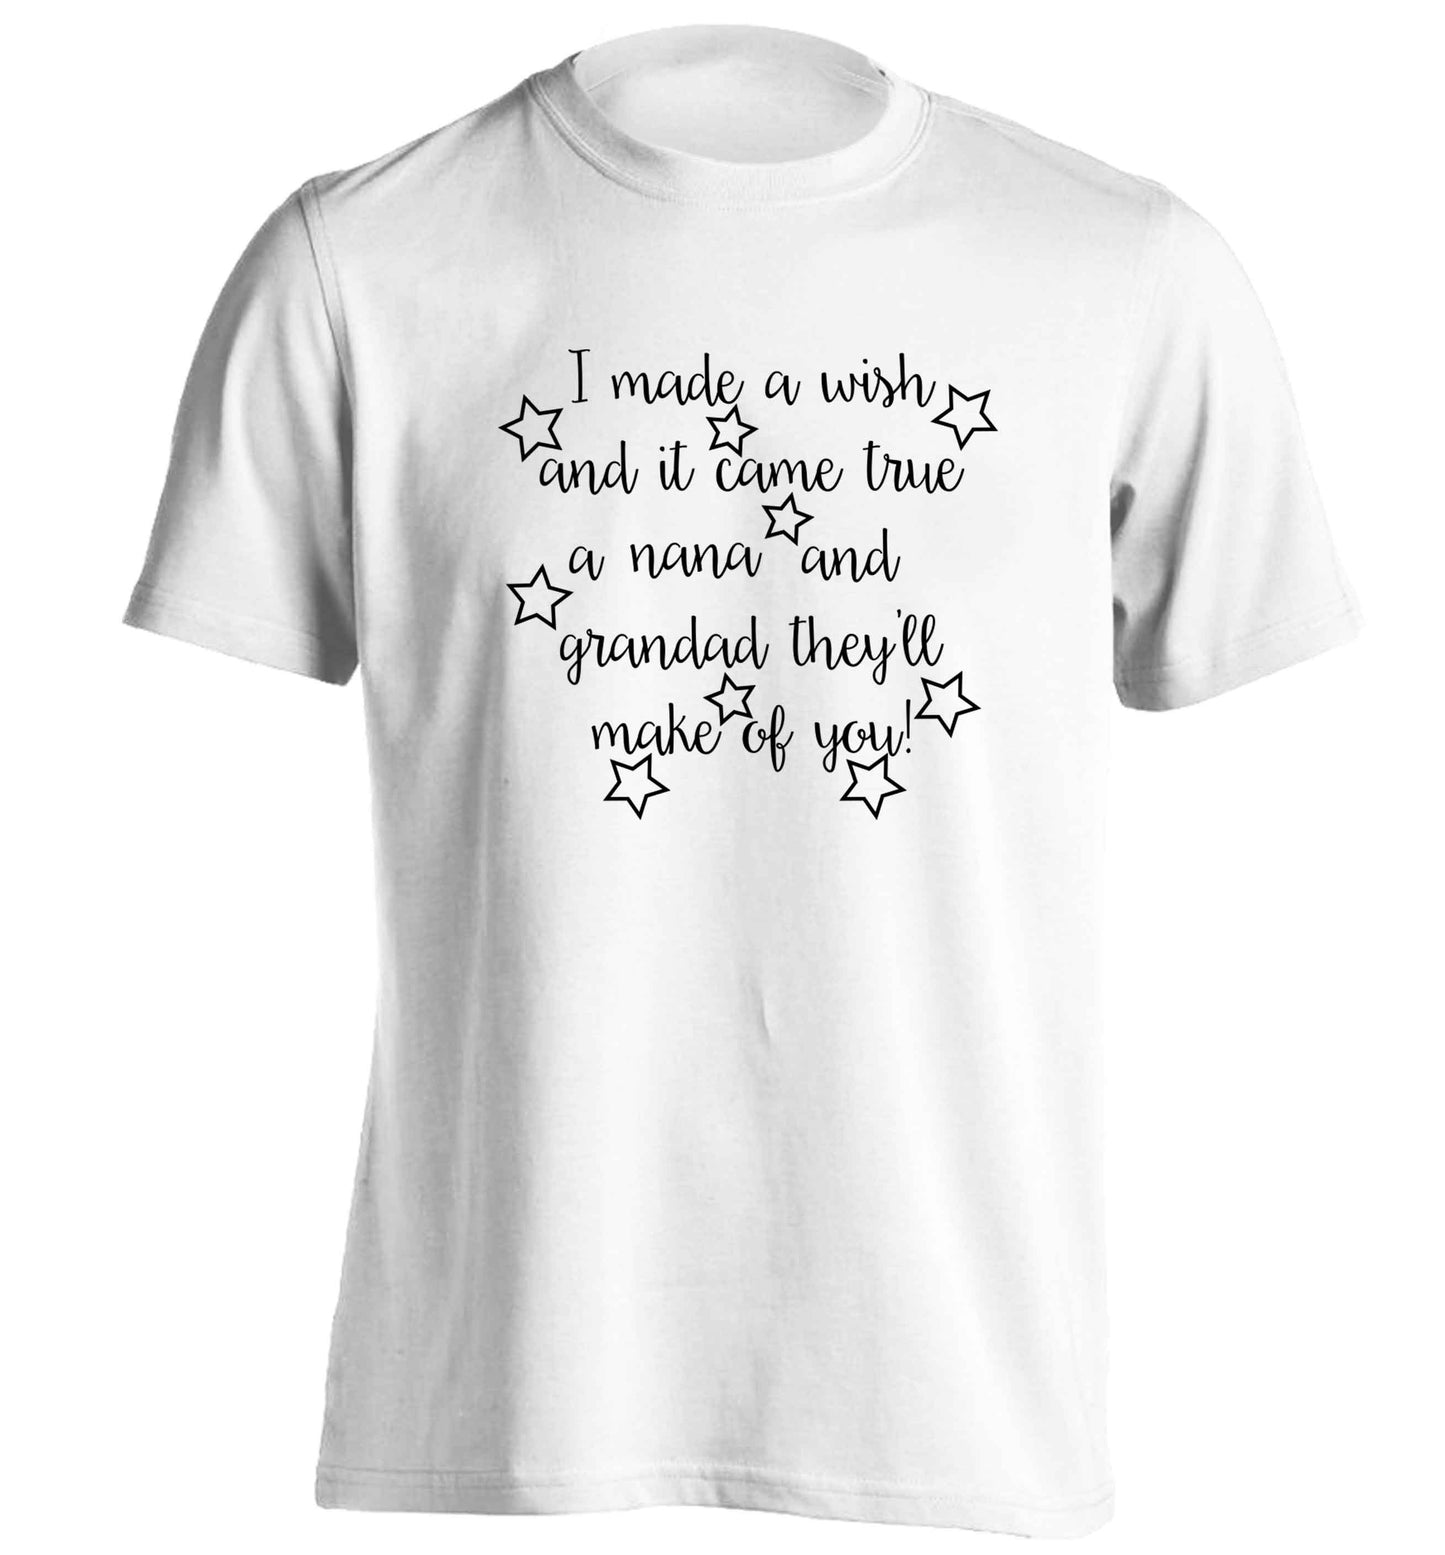 I made a wish and it came true a nana and grandad they'll make of you! adults unisex white Tshirt 2XL